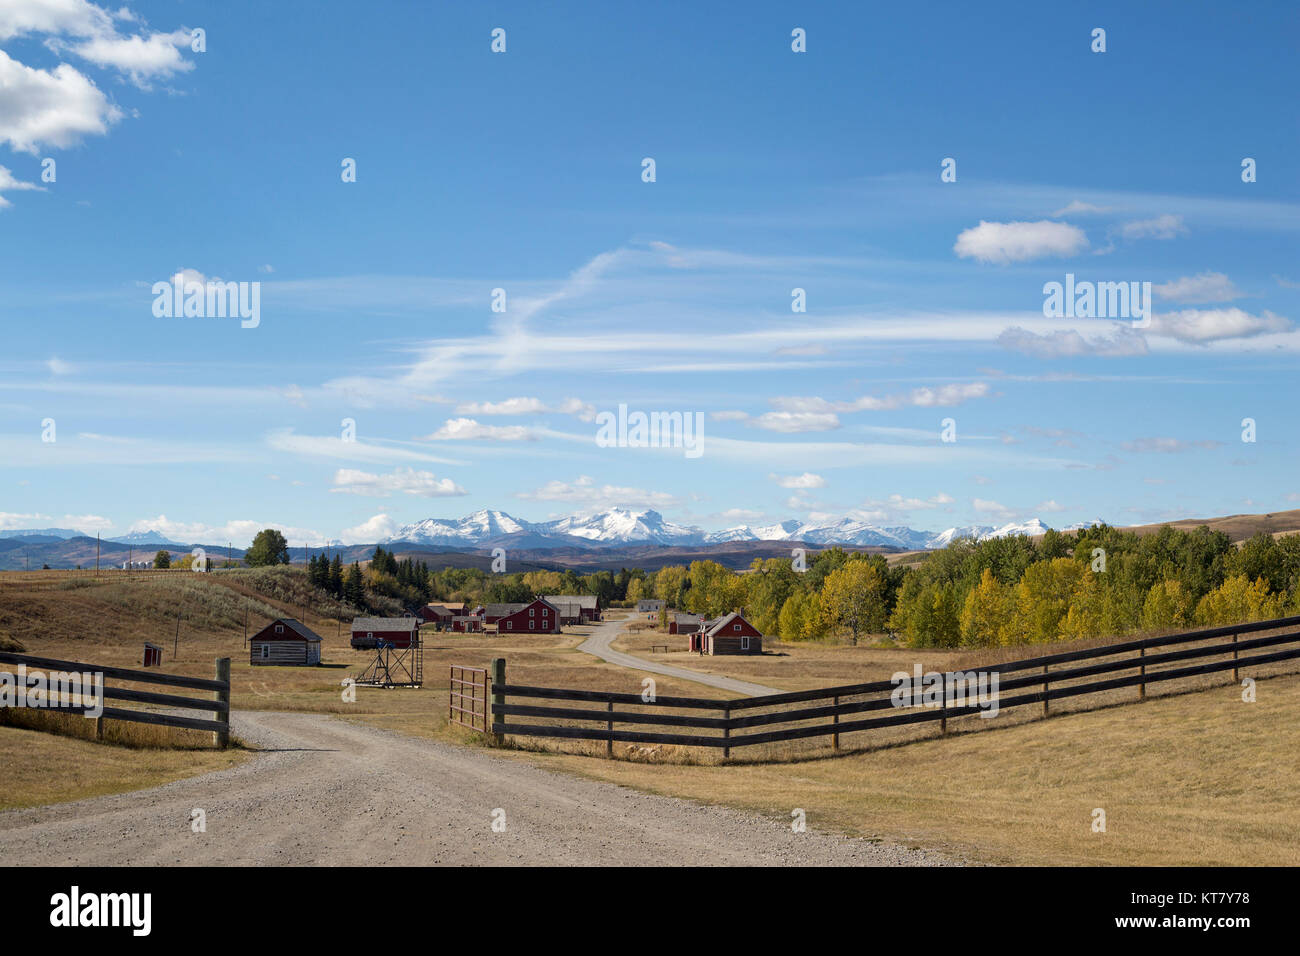 Bar U Ranch National Historic Site, a working ranch in the Rocky Mountain foothills of Alberta, Canada Stock Photo